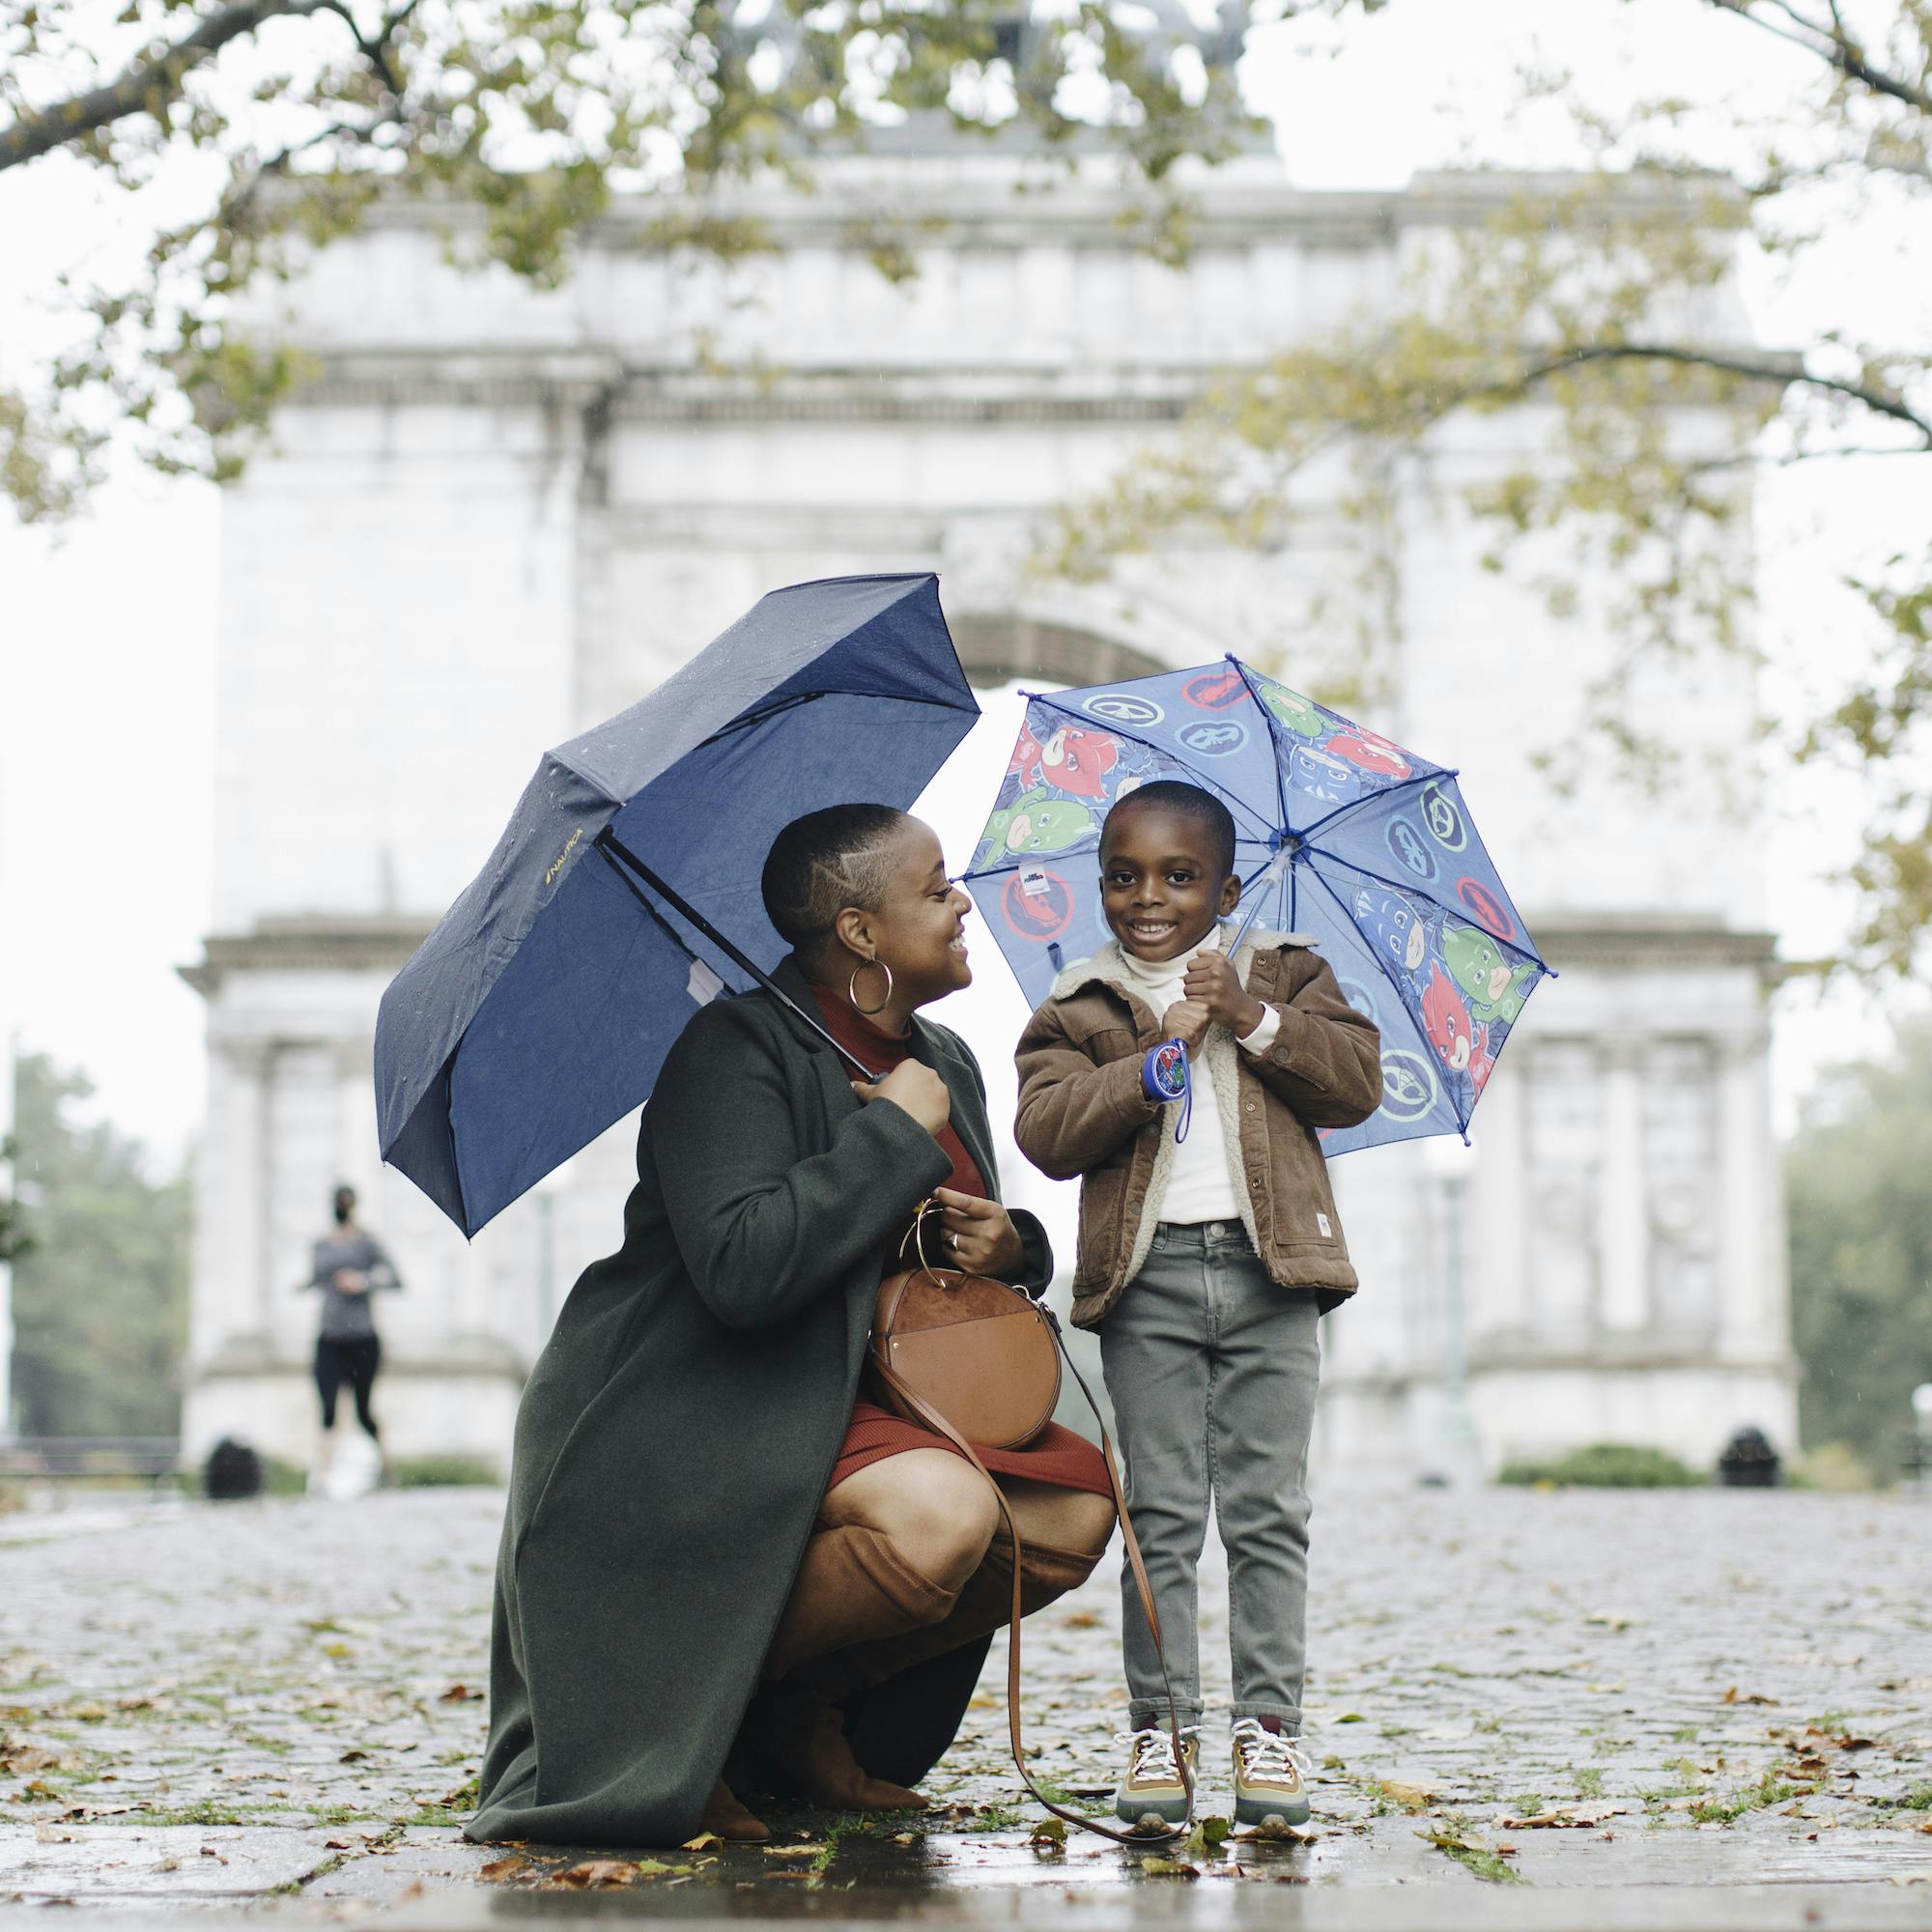 A smiling woman and a child holding umbrellas on a rainy day in front of a monument.